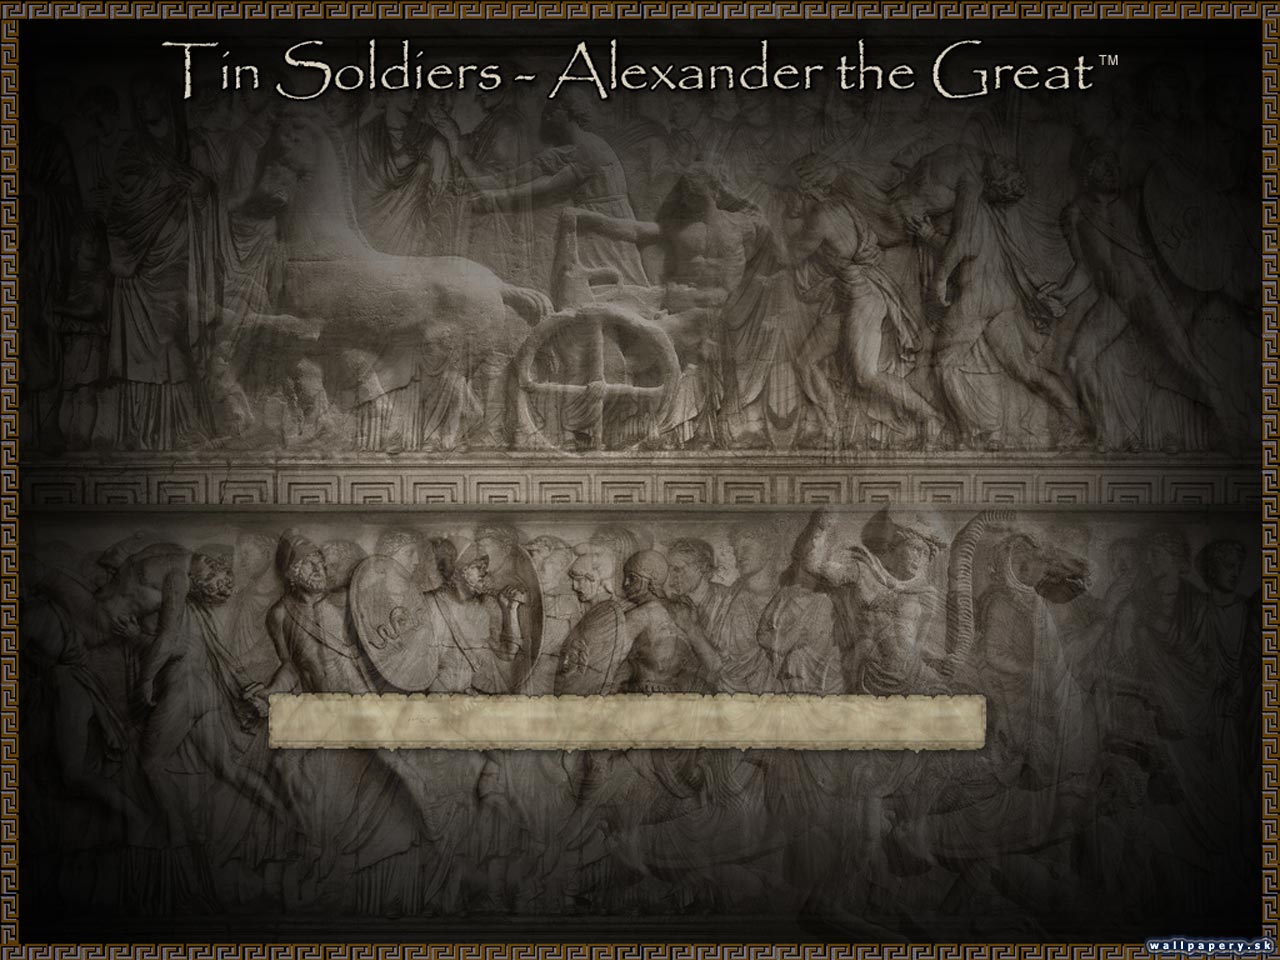 Tin Soldiers: Alexander the Great - wallpaper 2